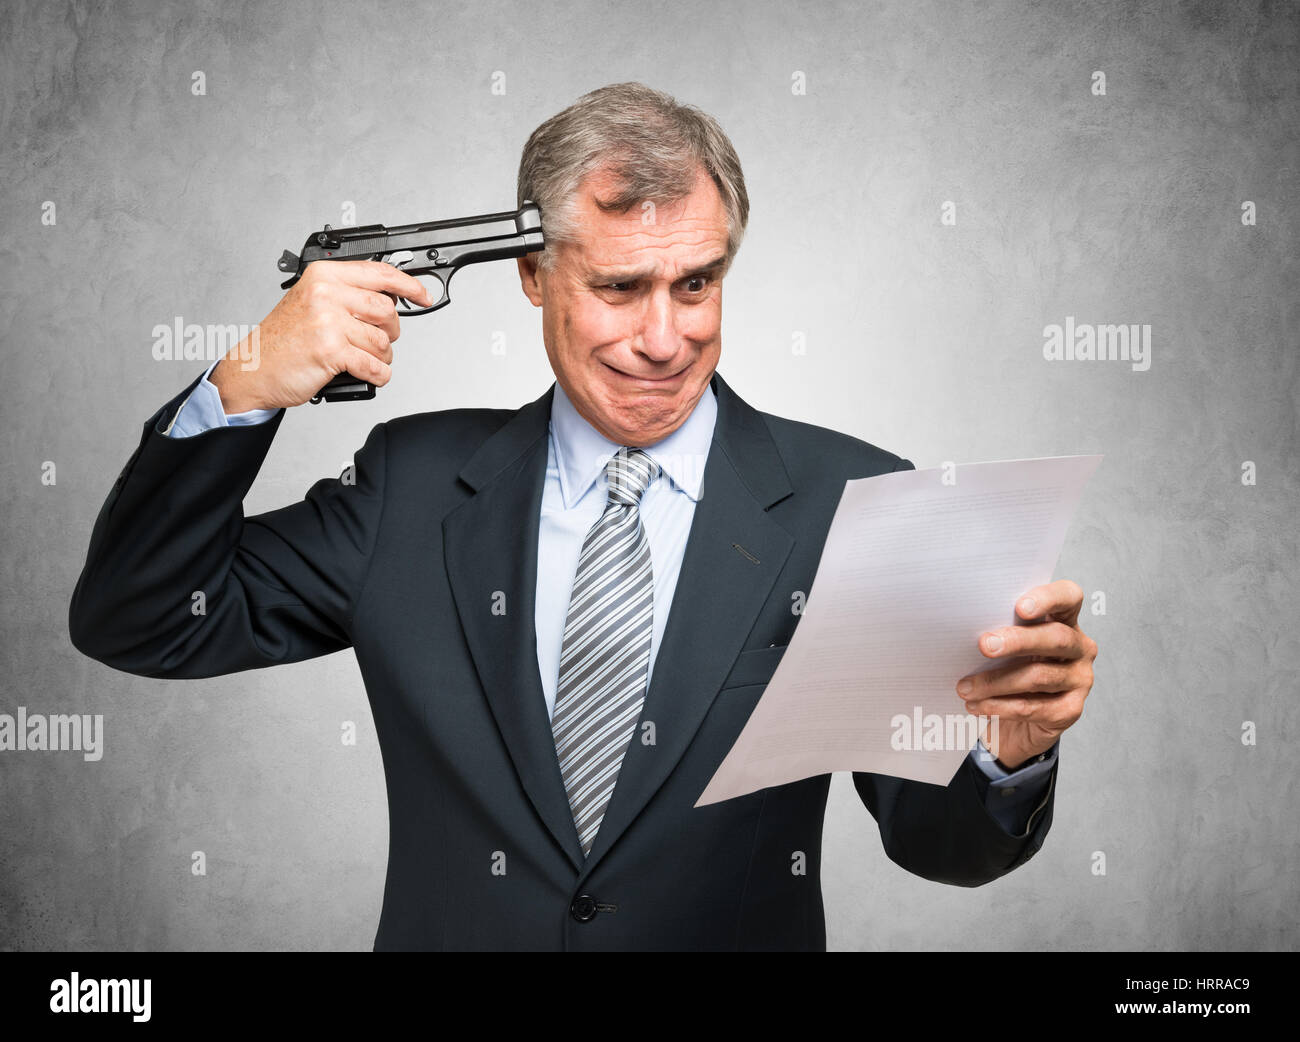 Desperate businessman pointing a gun to his head while reading a document Stock Photo